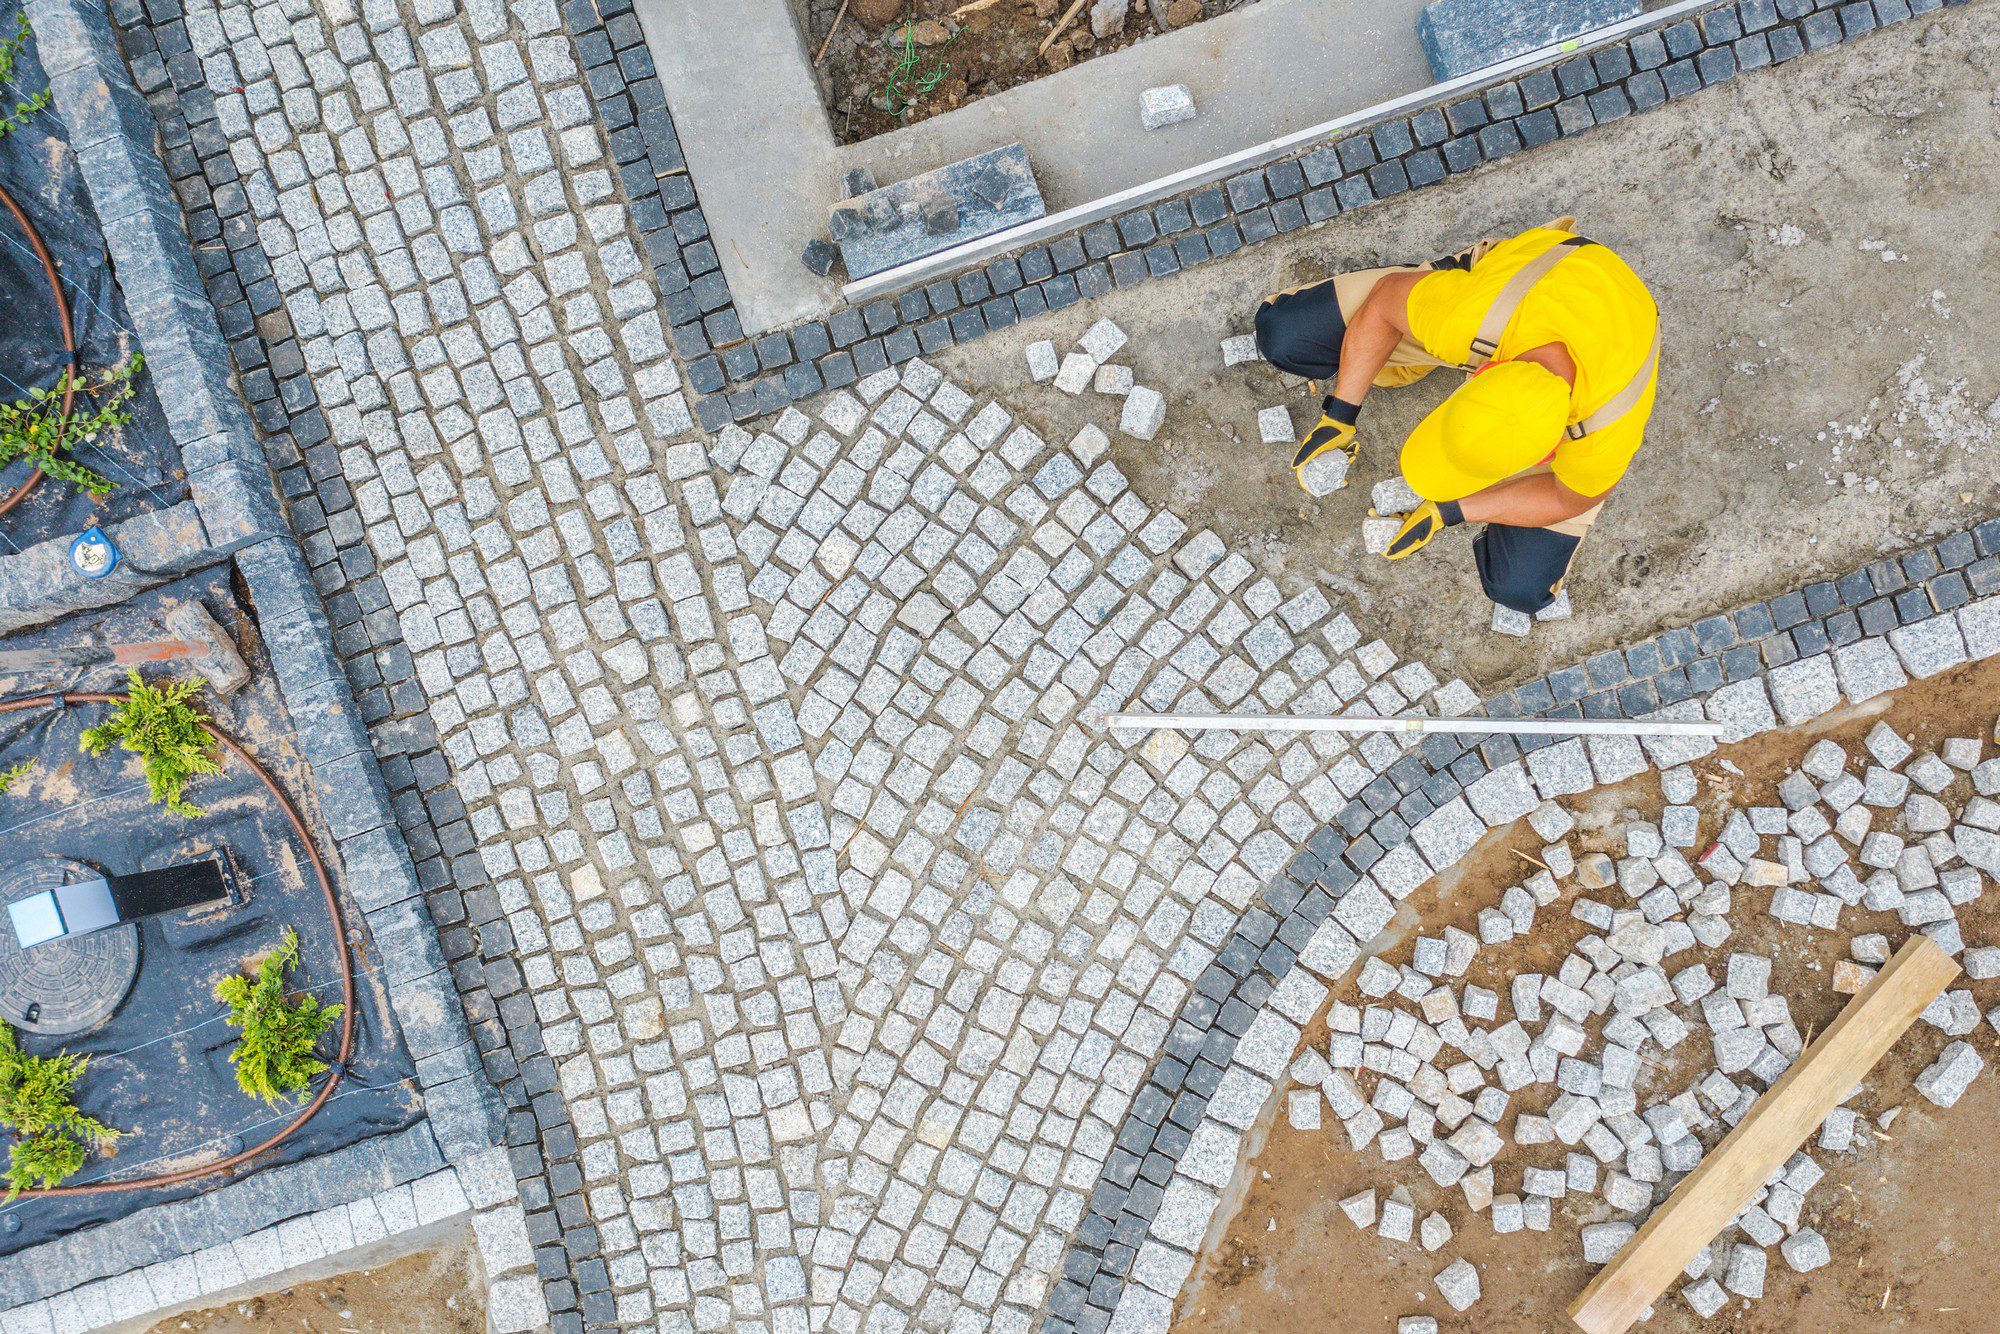 The image shows an aerial view of a person laying paving stones to create a patterned walkway or street. The person is wearing a high-visibility yellow vest and a yellow hard hat, suggesting they are a worker engaged in construction or landscaping. Around the worker are areas with completed cobblestone paving, and other sections awaiting completion, with loose paving stones scattered about. The stones are of different colours, forming a distinctive pattern. Also visible are some construction materials and a manhole cover surrounded by what appears to be new pavement. The photo captures a moment of urban development or renovation.